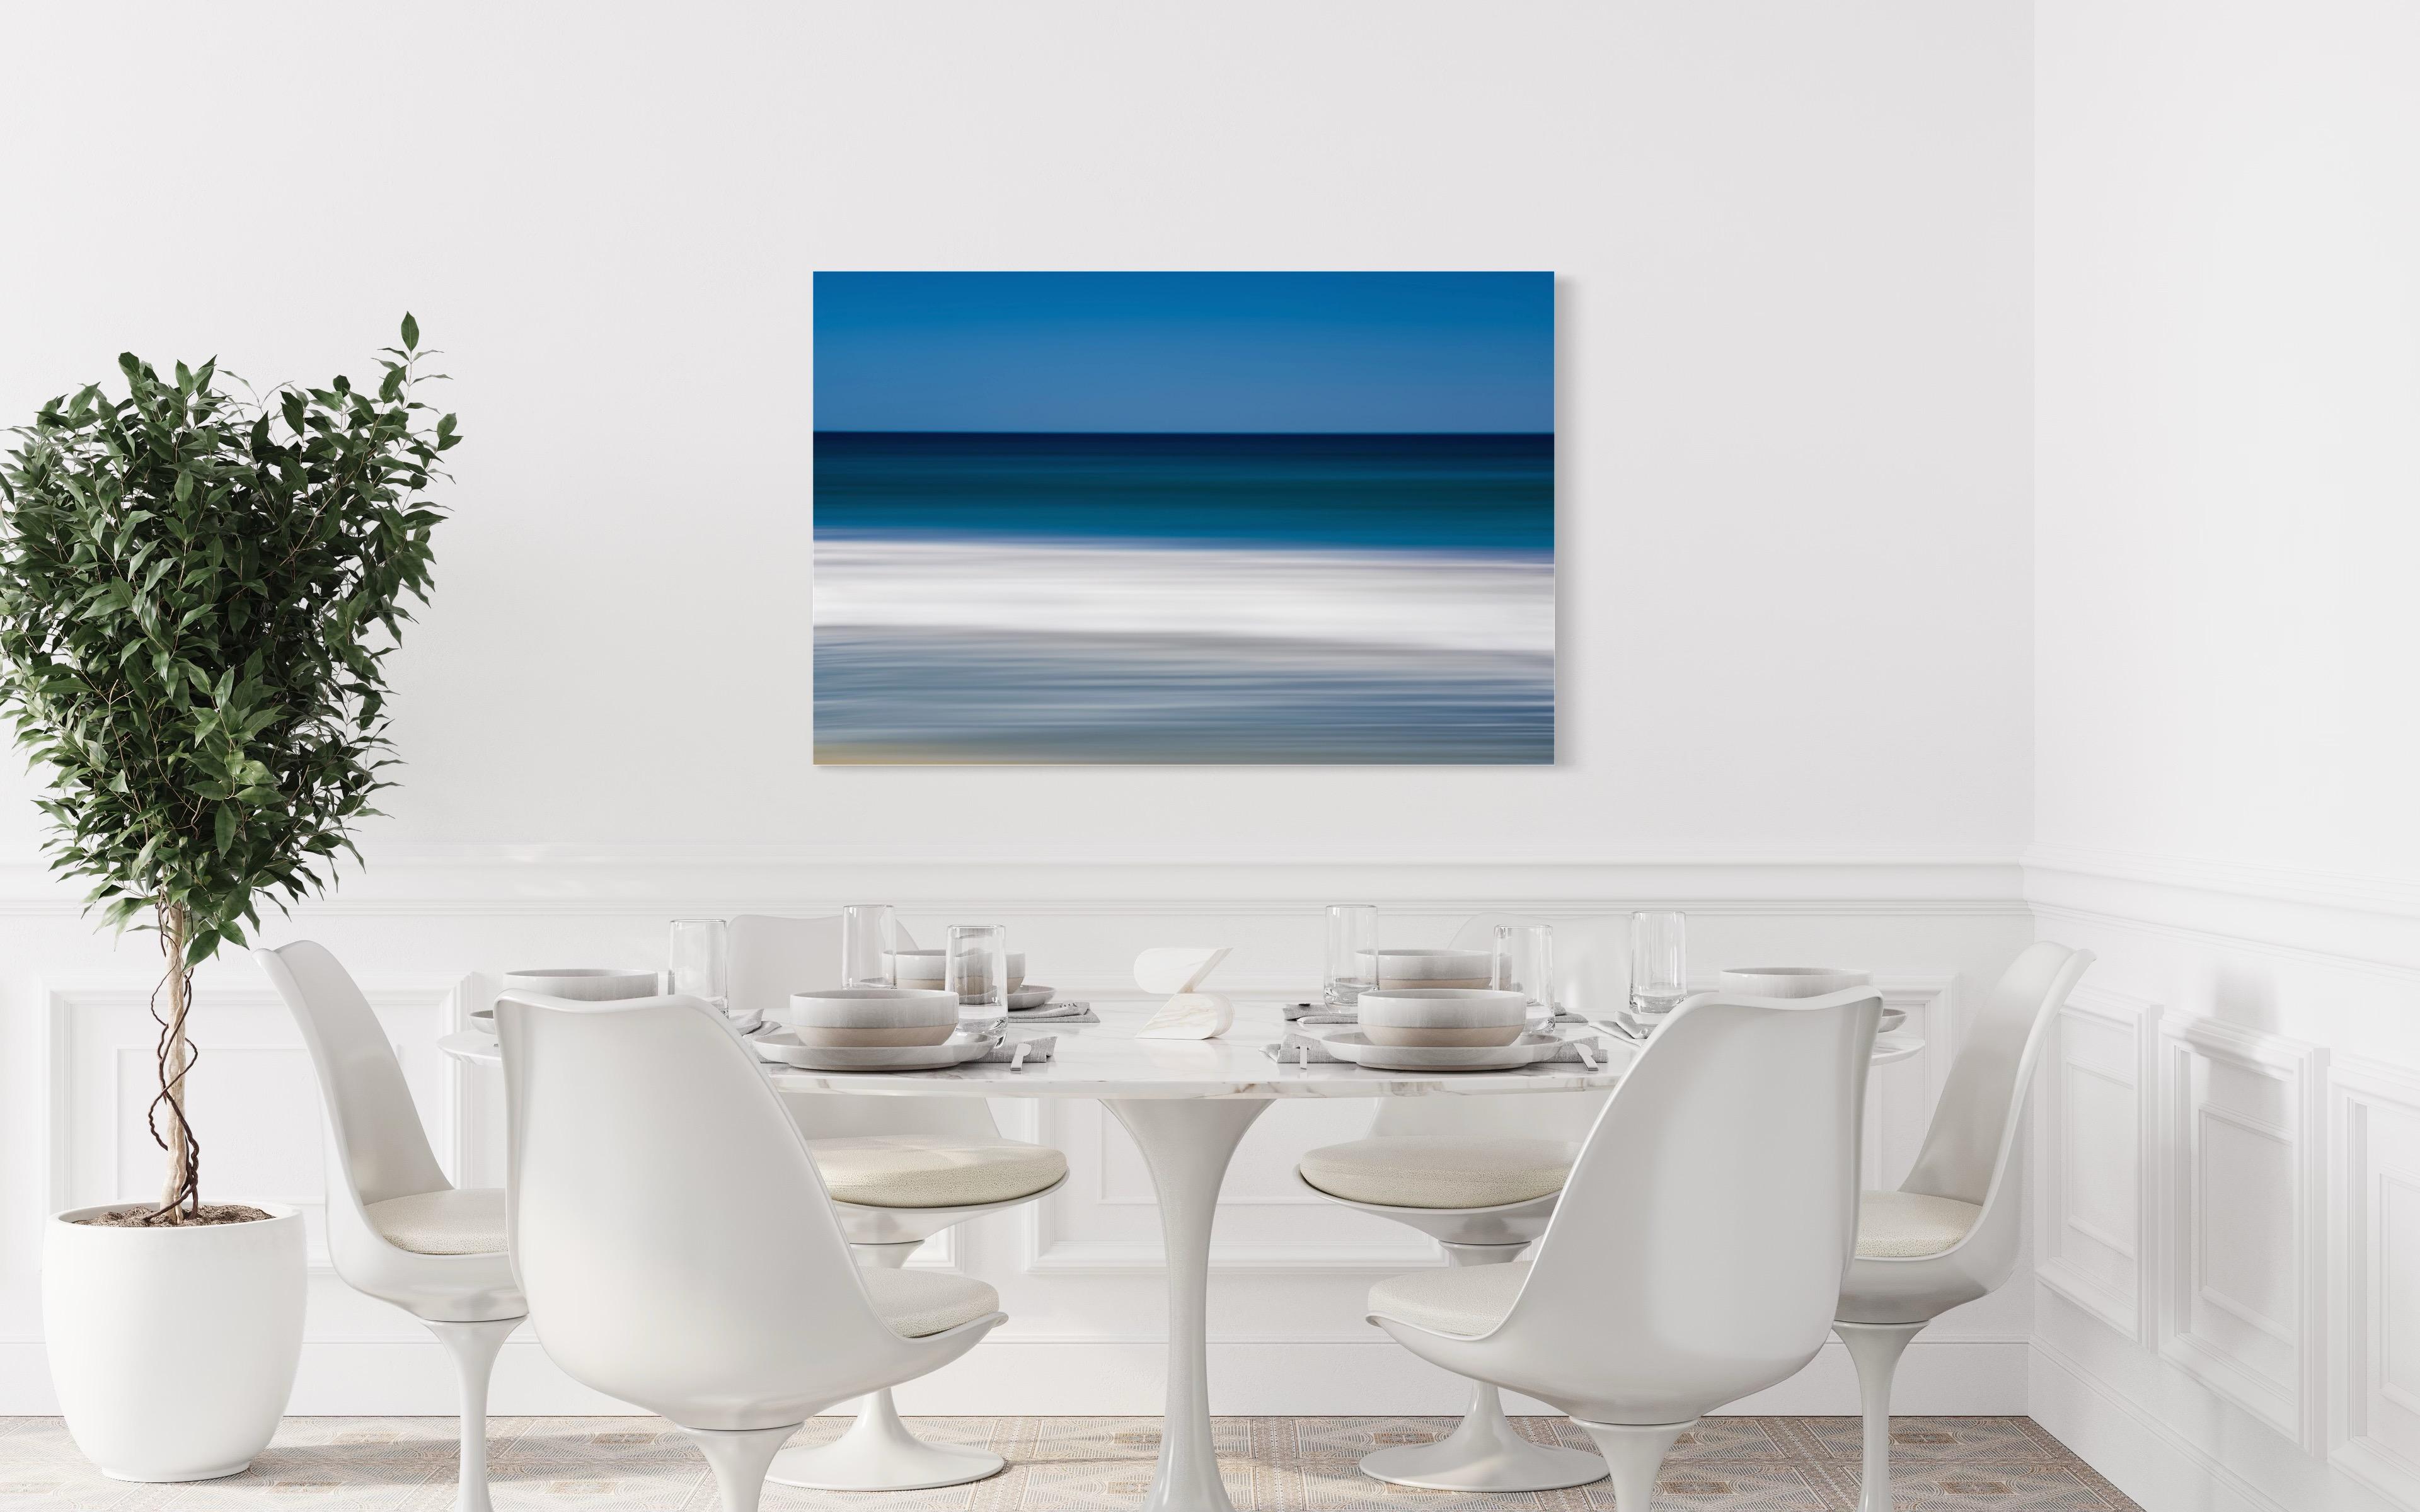 This photograph by Tori Gagne features an abstracted landscape composition and a coastal blue and white palette. An edition size of 25, this photograph by Tori Gagne is available as a metal sublimation print with a 1.3” deep silver flush mount frame